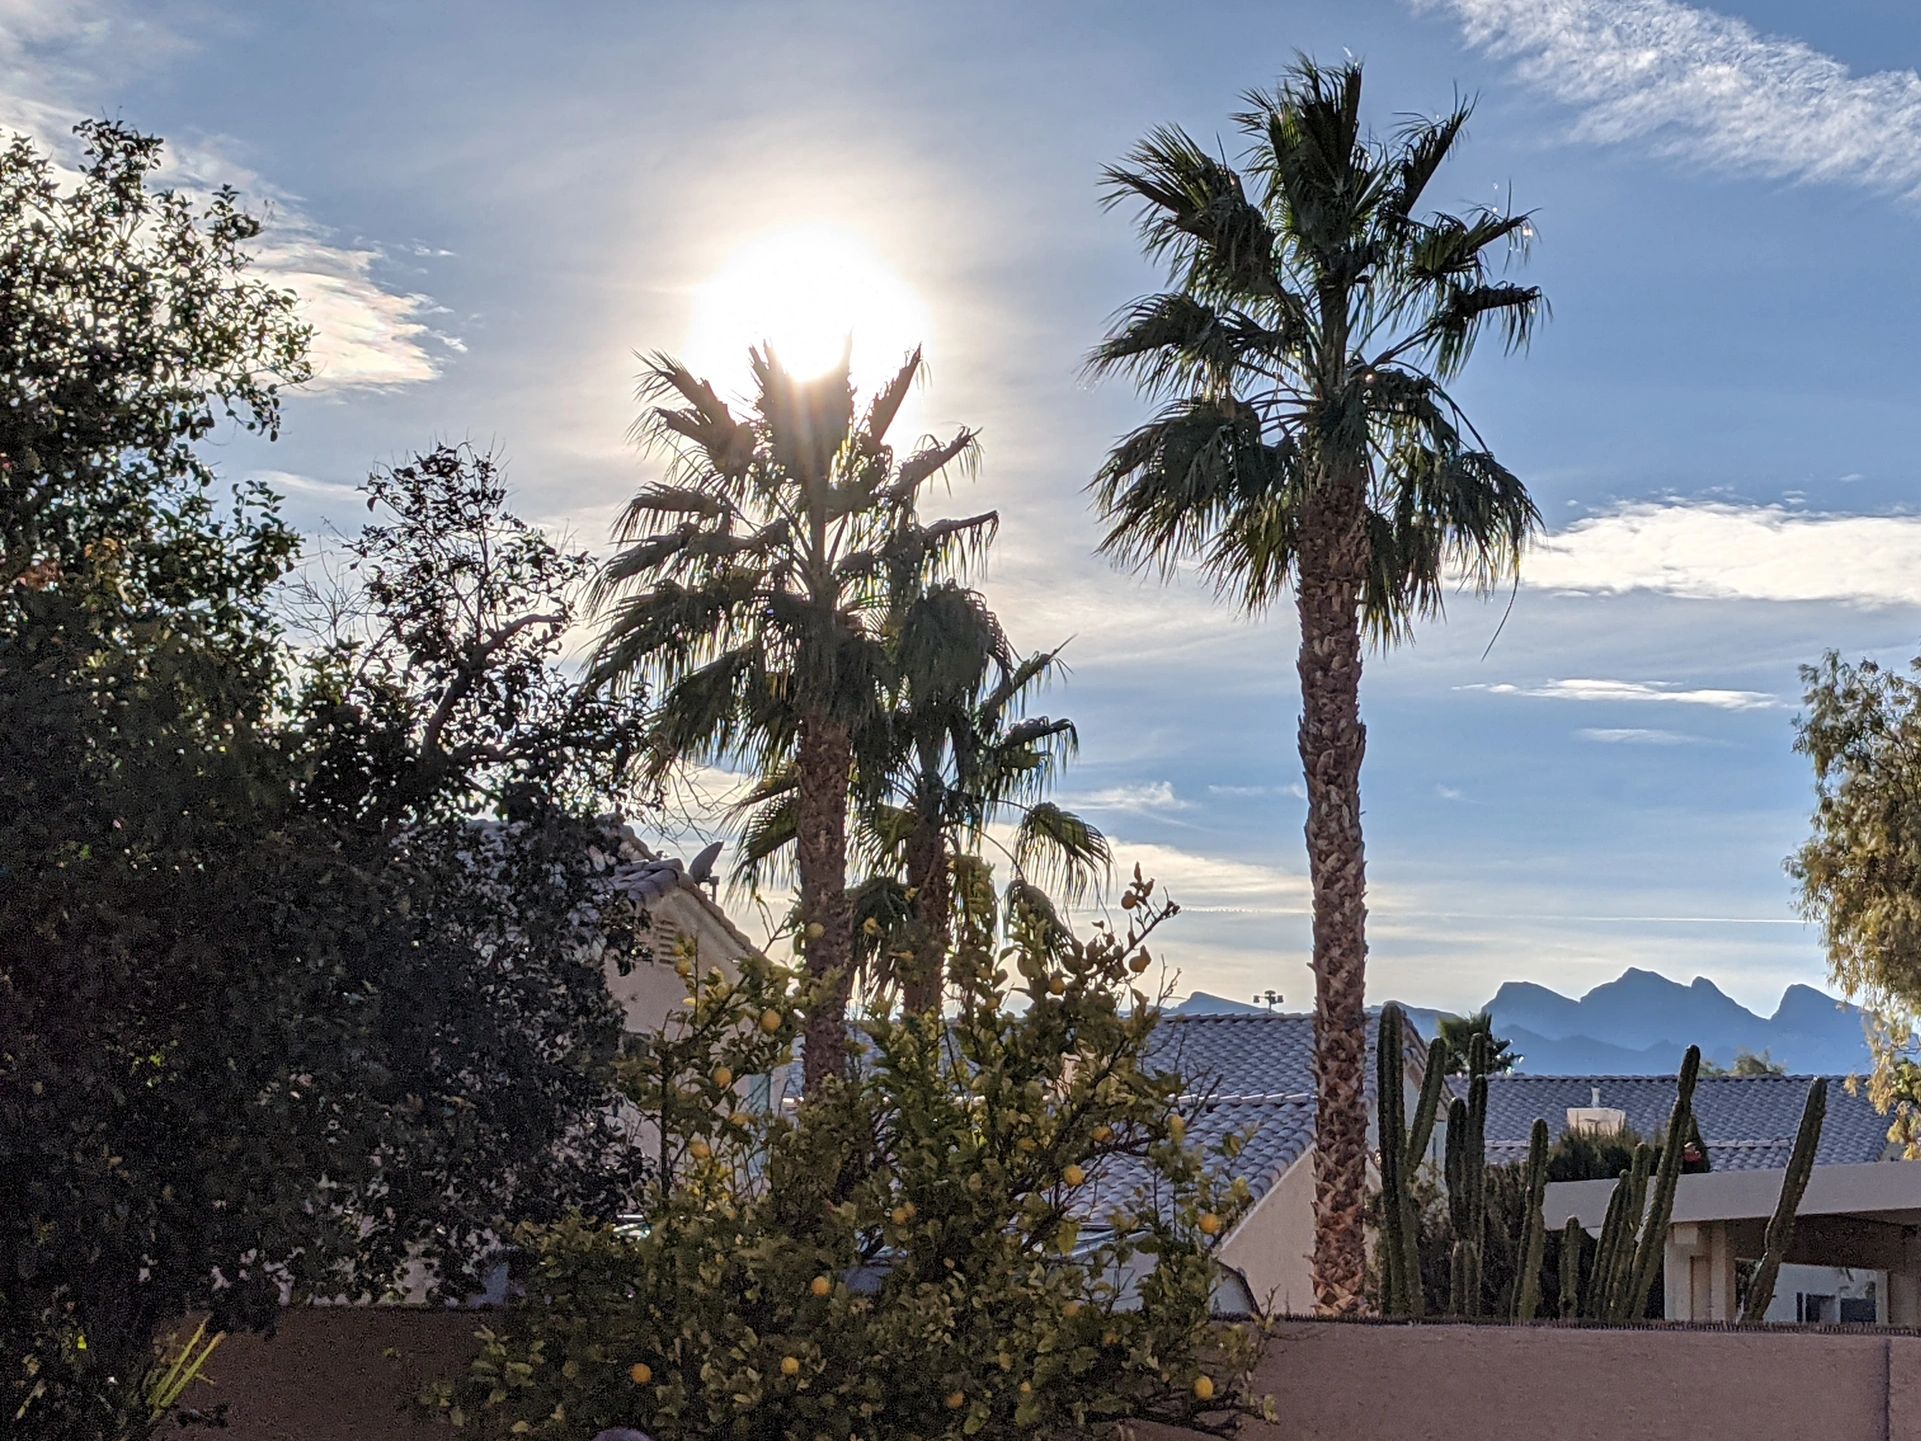 The view from home, to the Vegas mountains